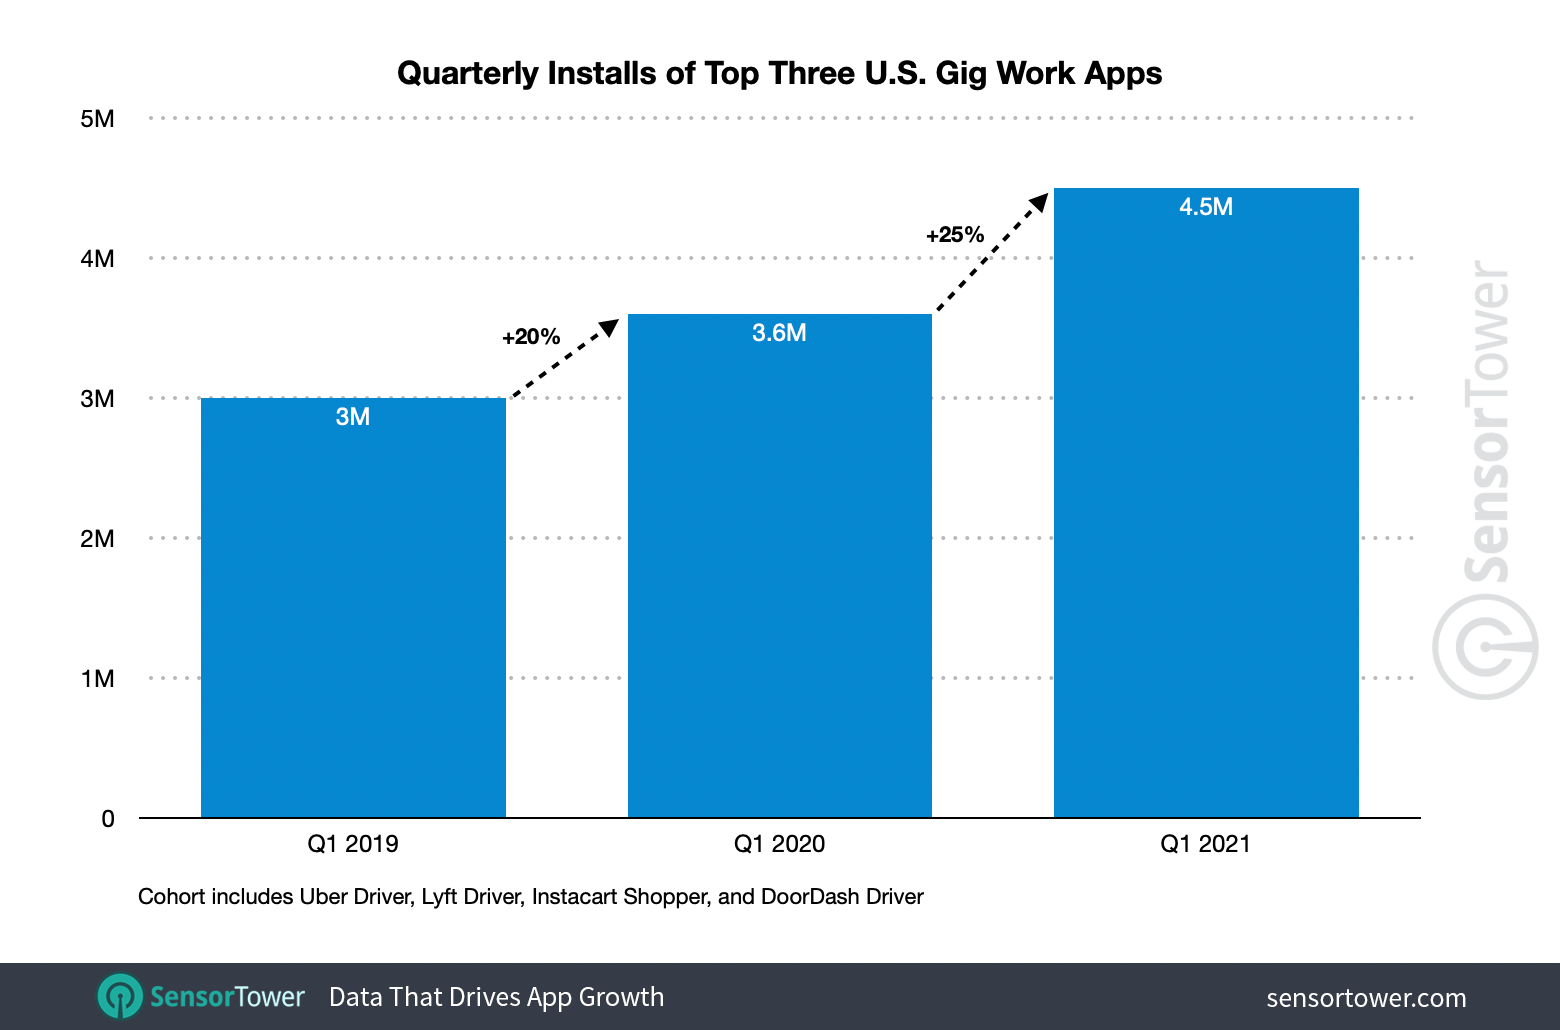 The top three gig work apps grew year-over-year from 2019 to 2021.